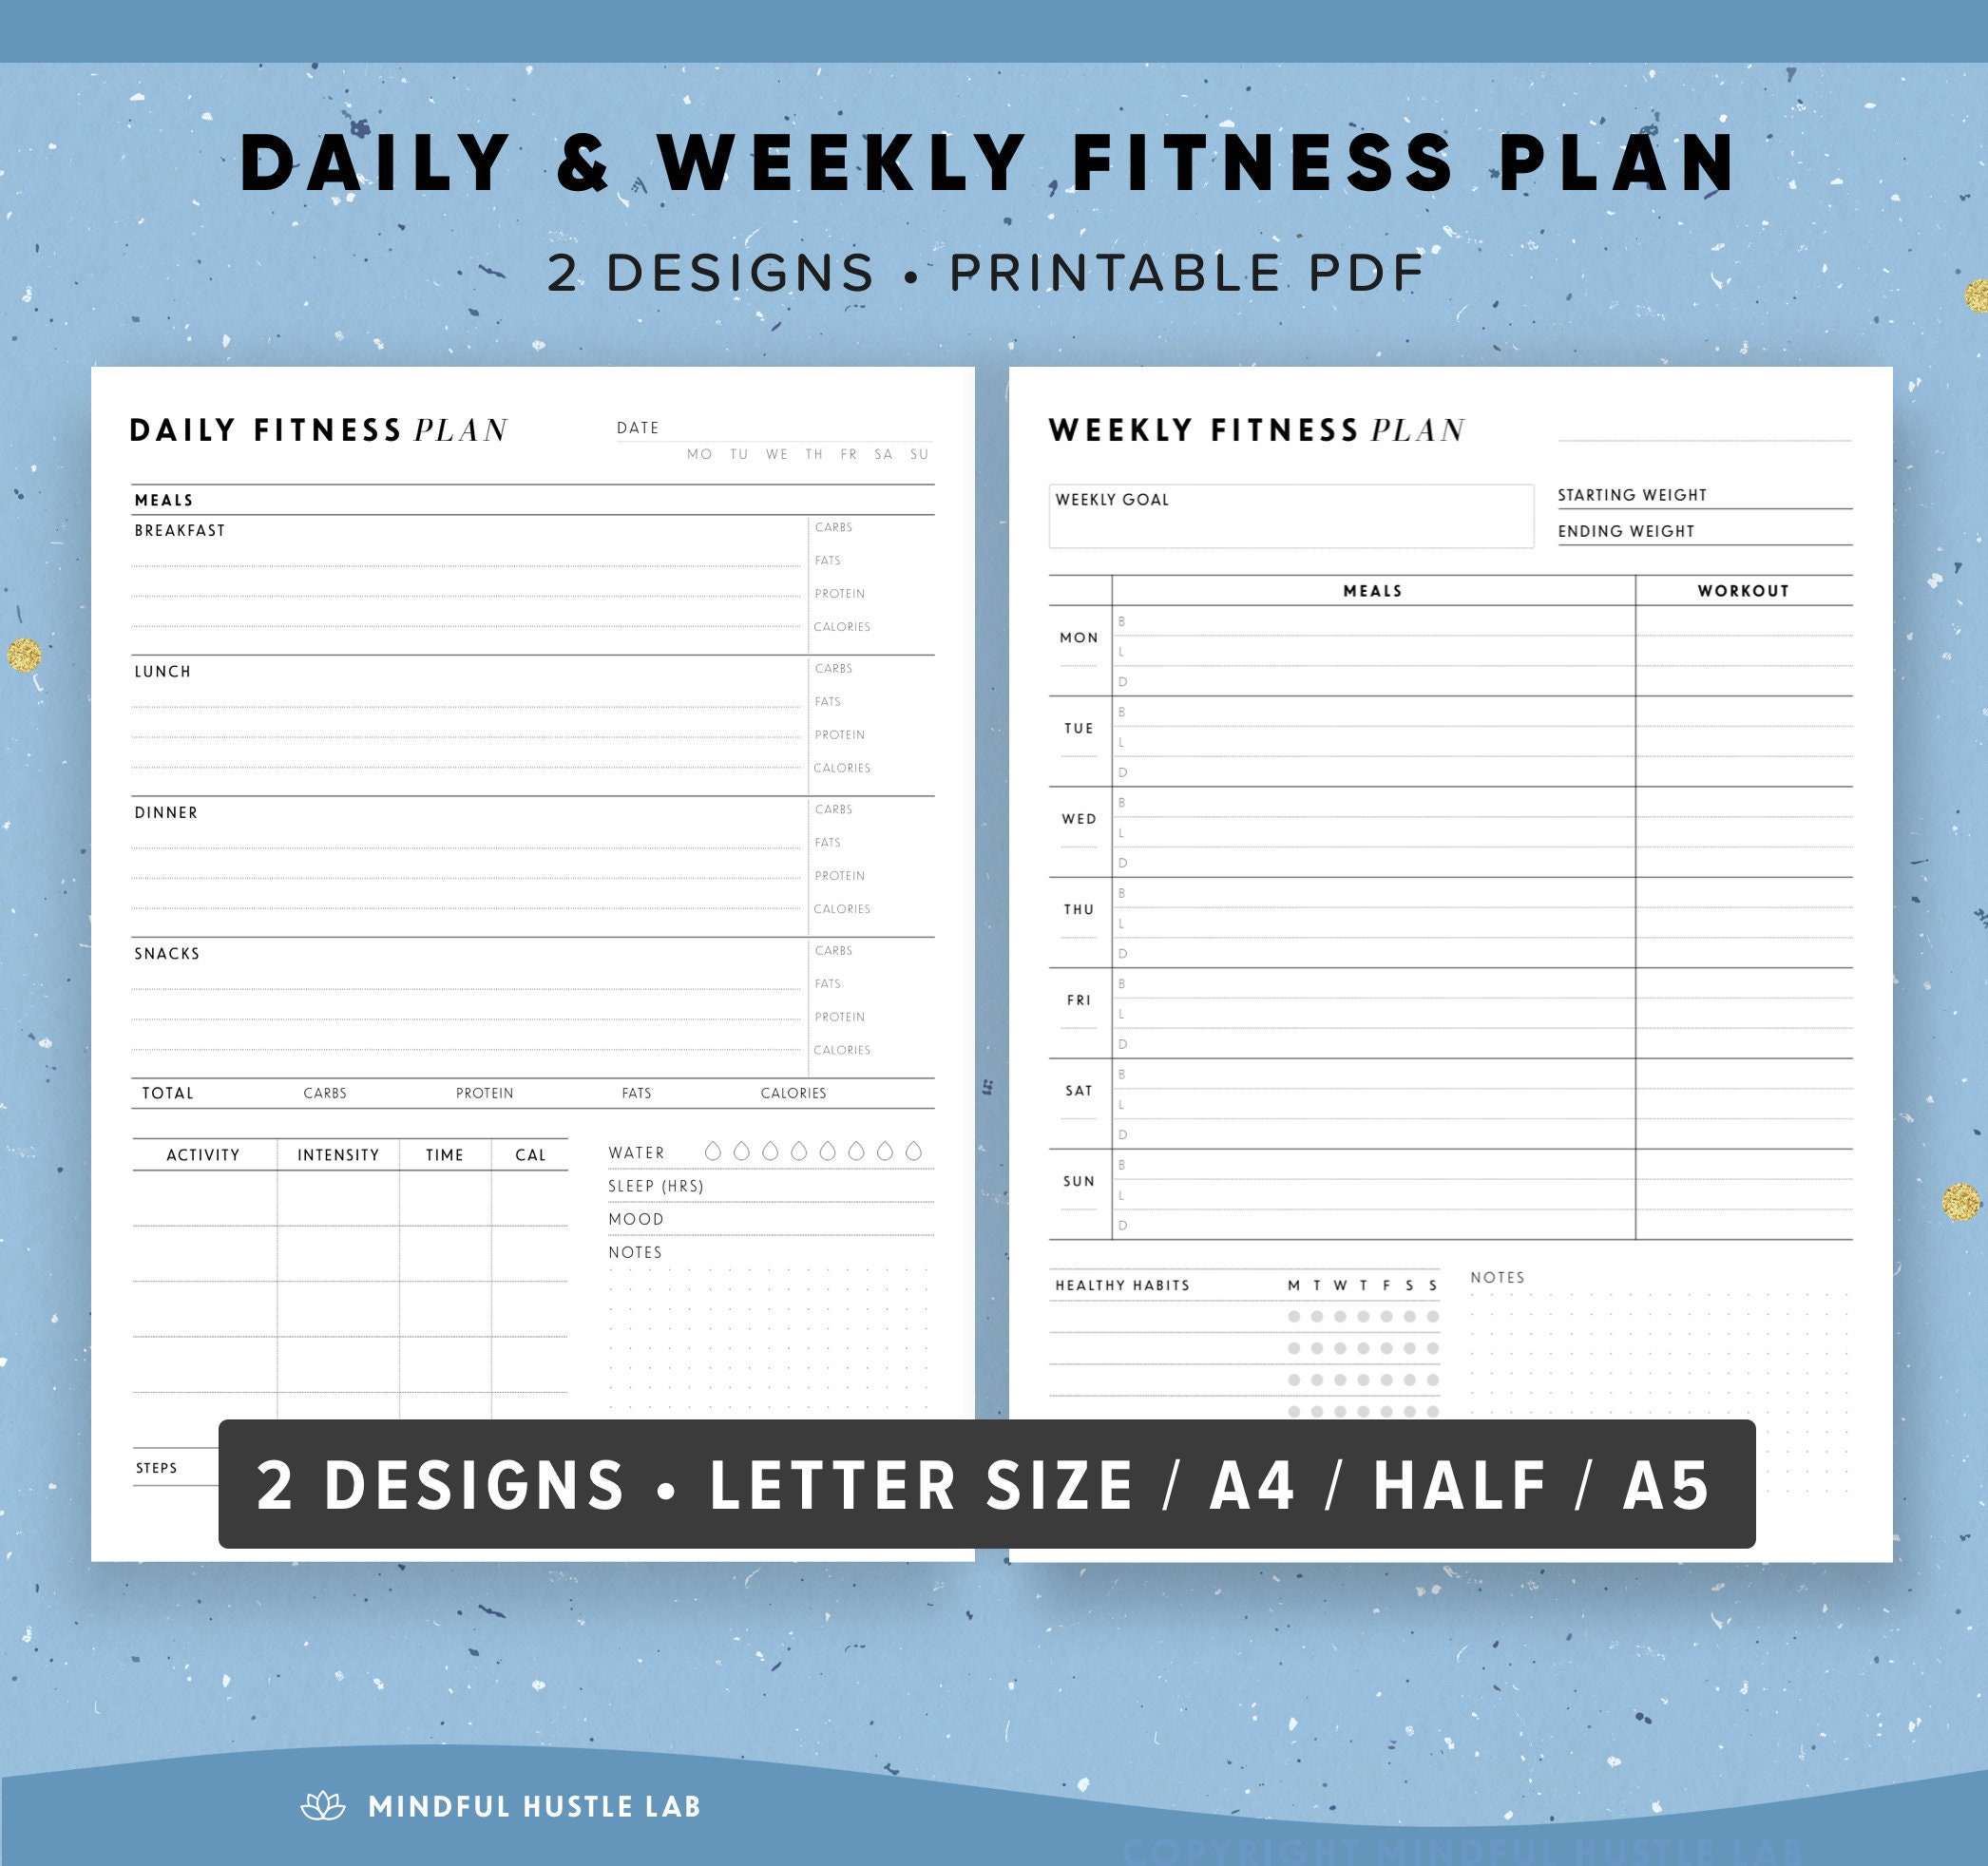  A5 Size Planner Workout Tracker Inserts, A5 Size Fitness  Inserts, Fits with Kate Spade A5, Louis Vuitton GM, Carpe Diem, Color  Crush, Filofax (Planner Sold Separately) : Handmade Products